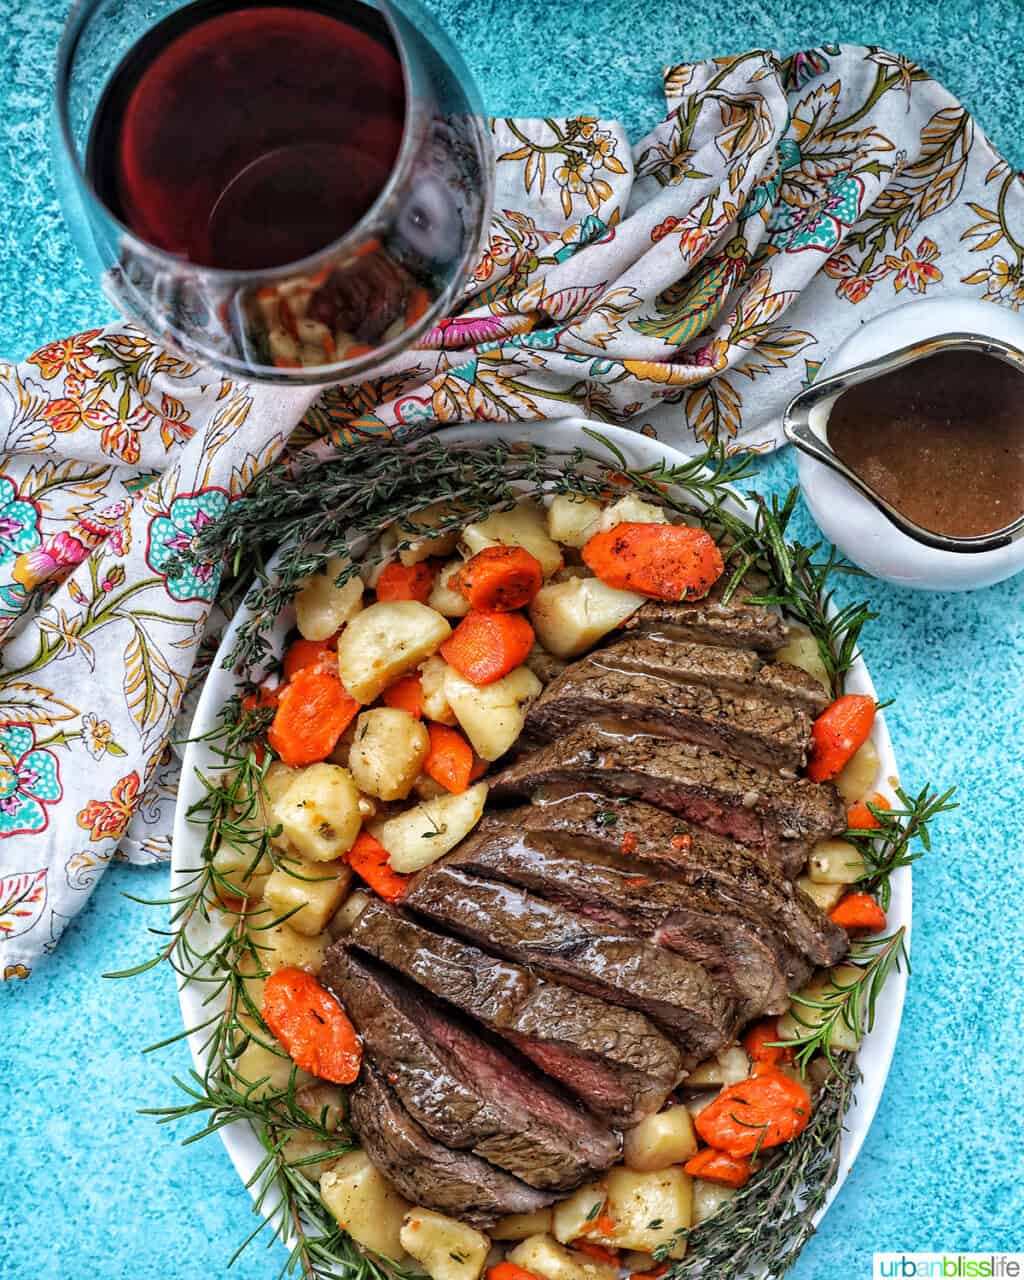 Sliced sirloin tip roast surrounded by carrots, potatoes, and herbs with a side of gravy and glass of red wine.